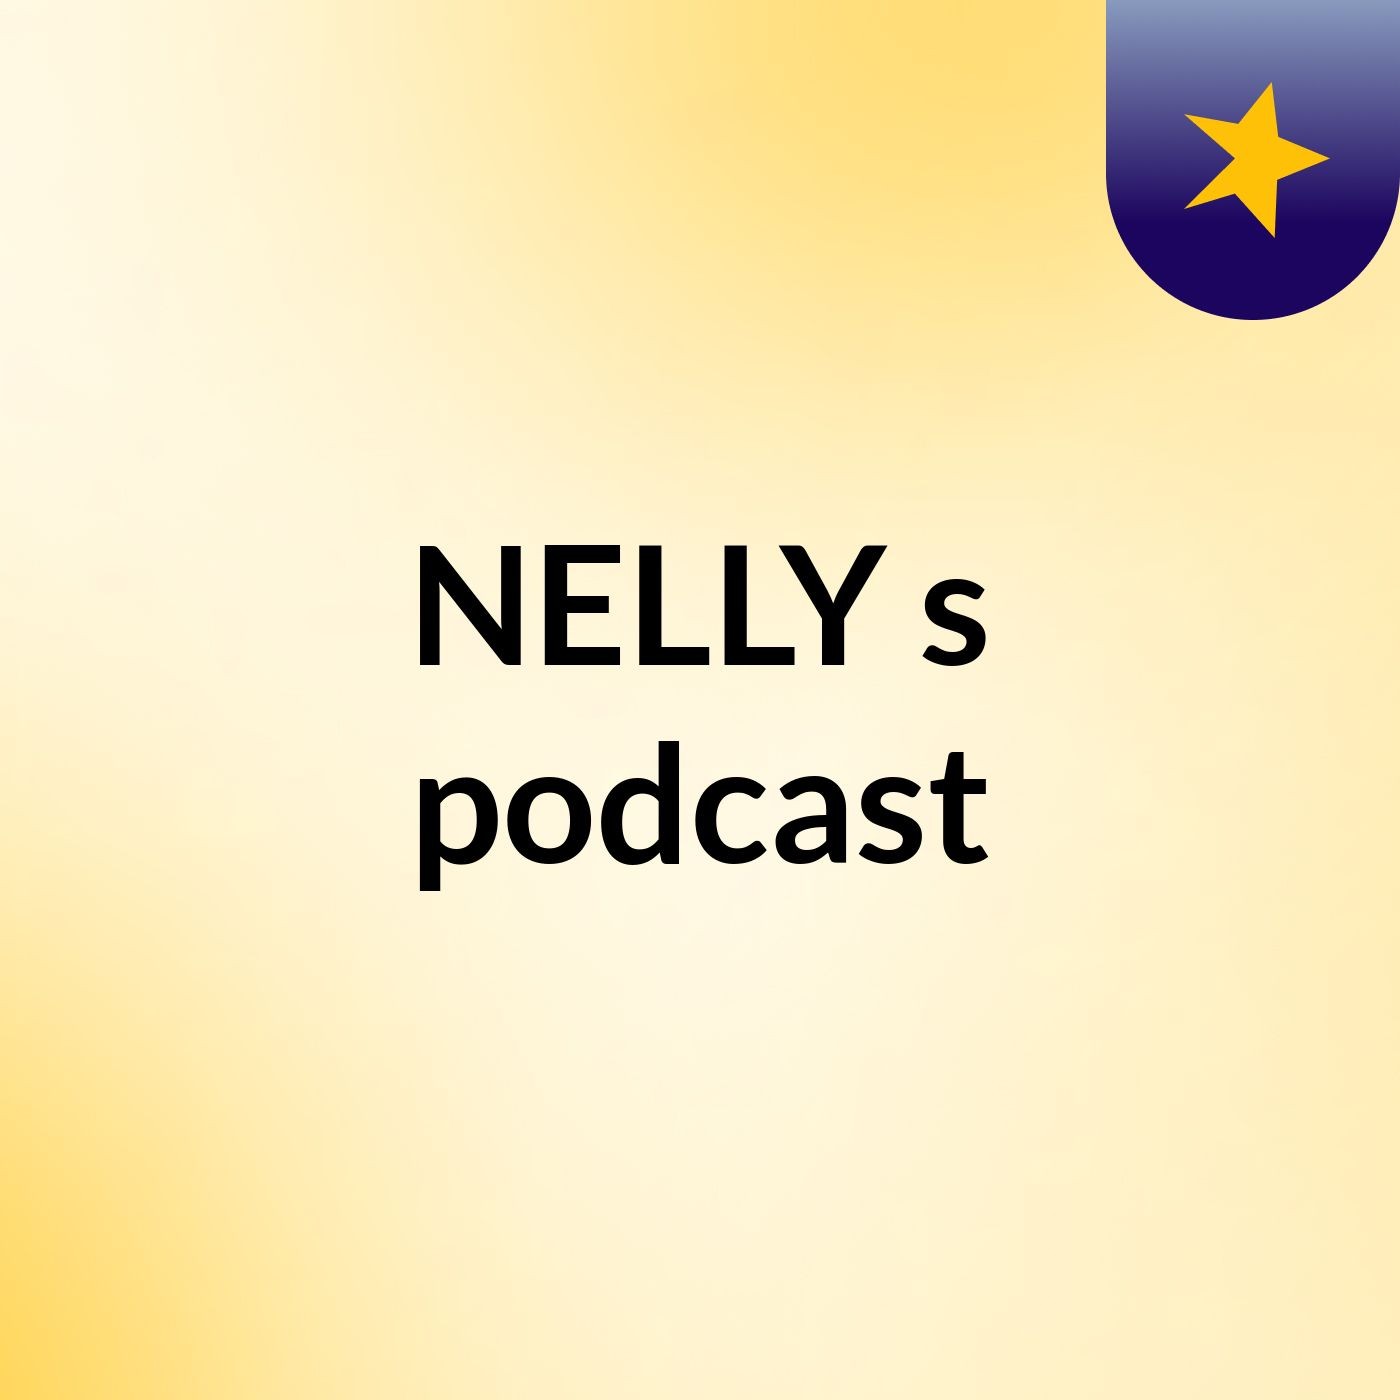 NELLY's podcast